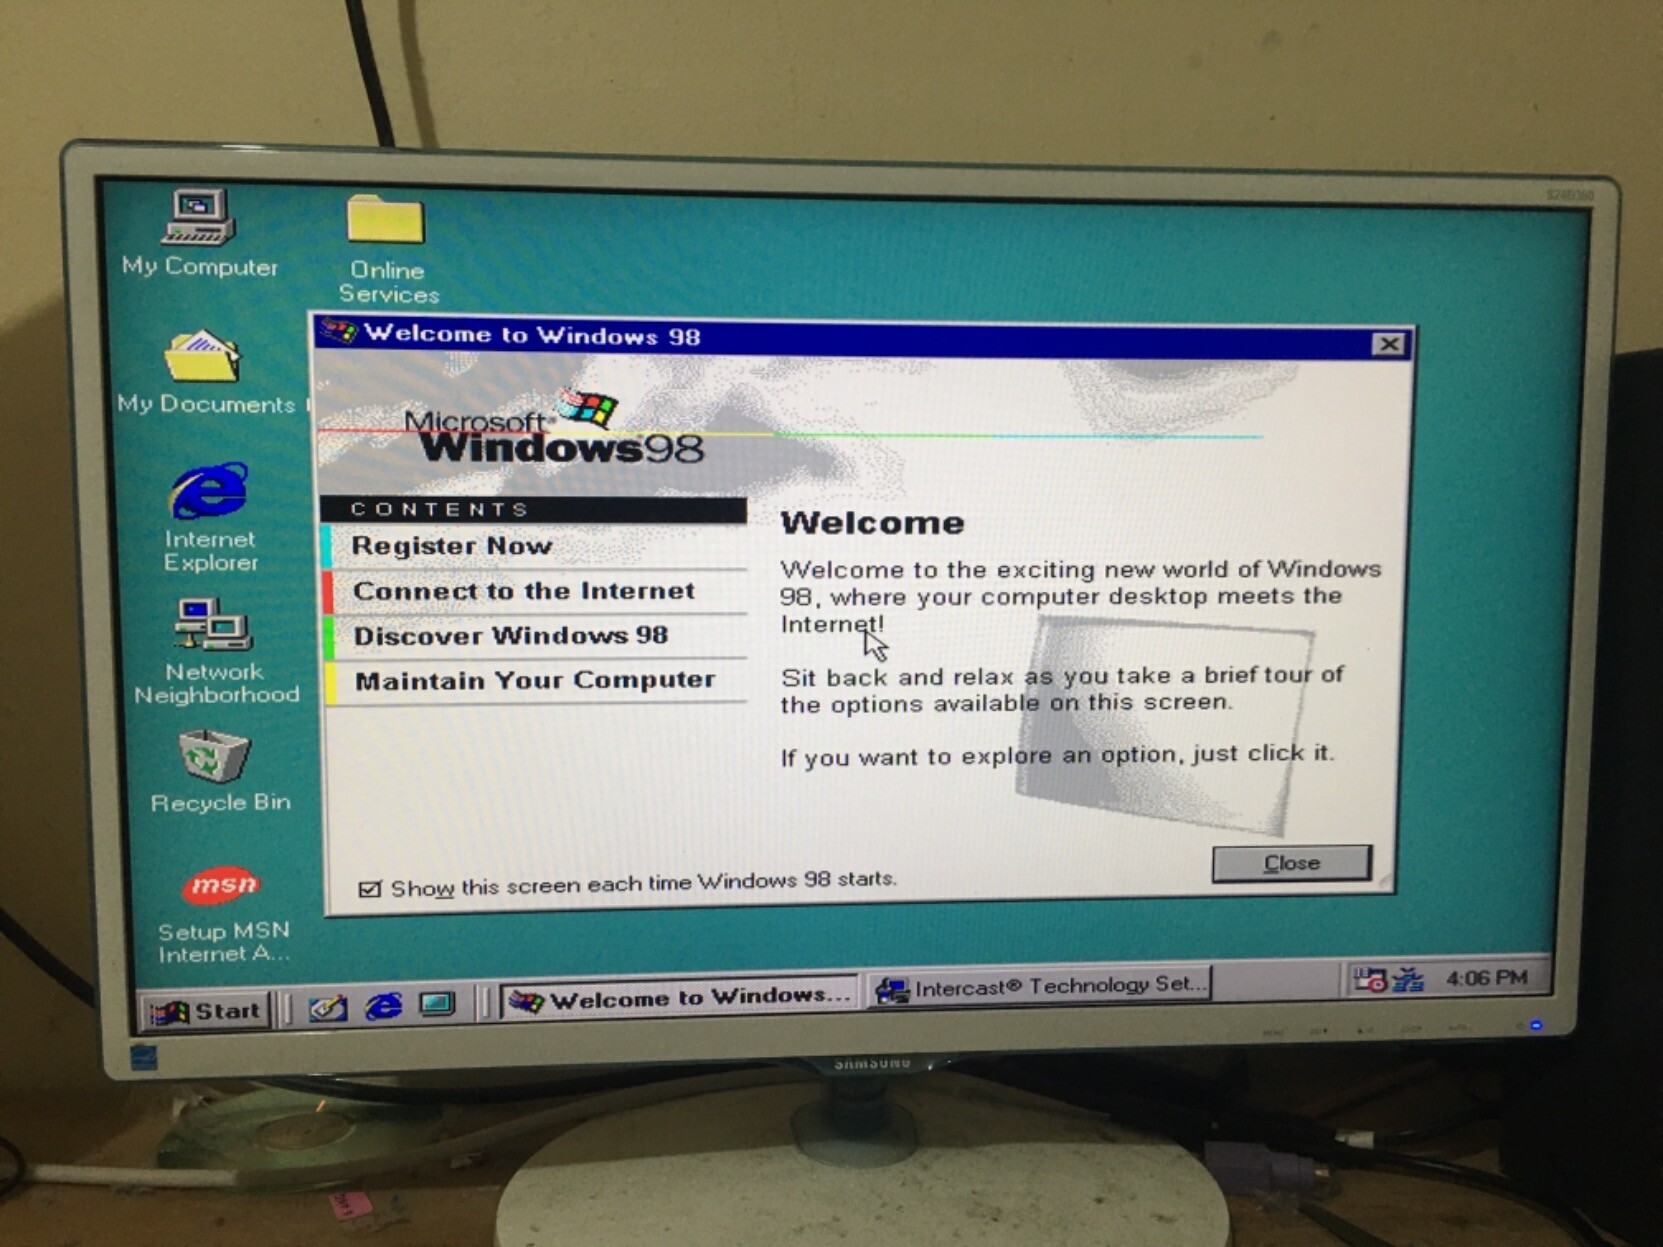 Windows 98 welcome screen. The resolution is squished.